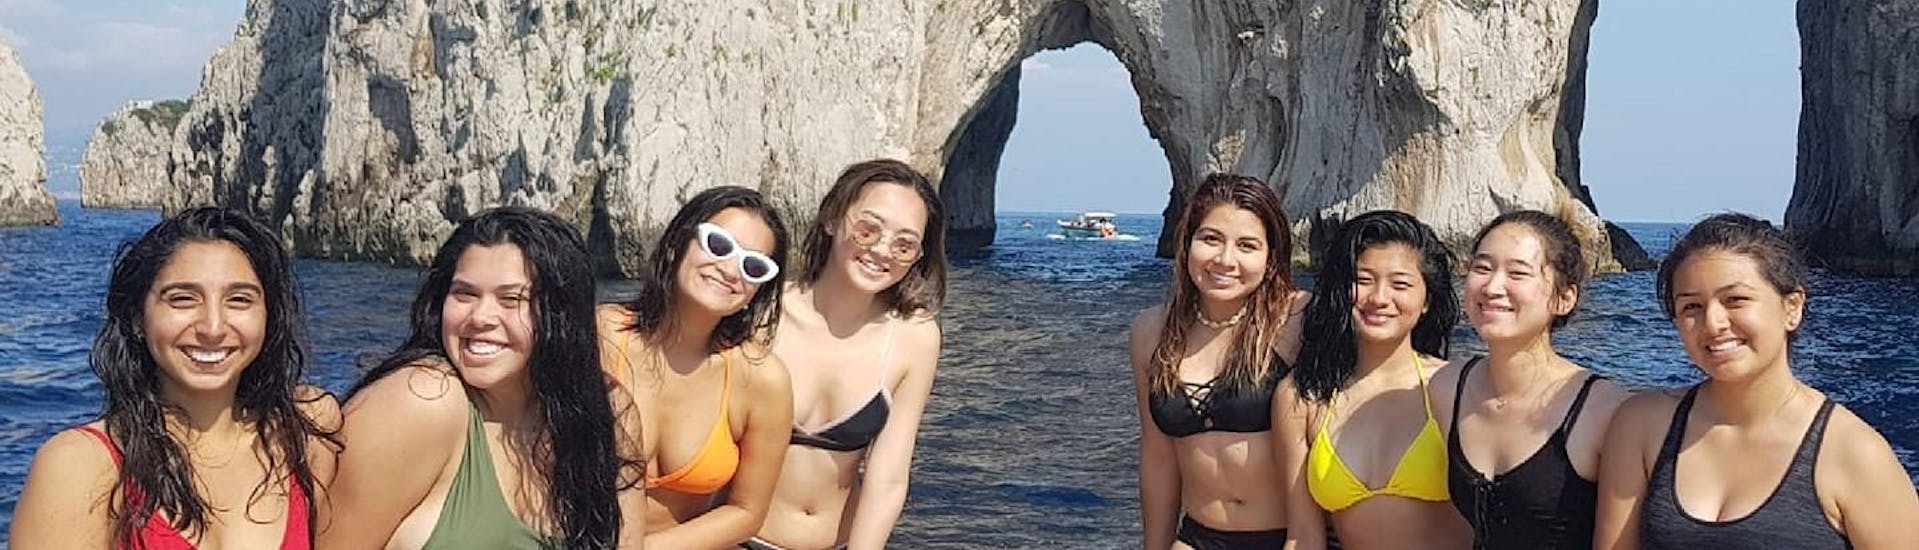 A group of friends posing behind the Faraglioni rocks during the classic boat trip from Sorrento to Capri with Lubrense Boats Costiera Amalfitana.